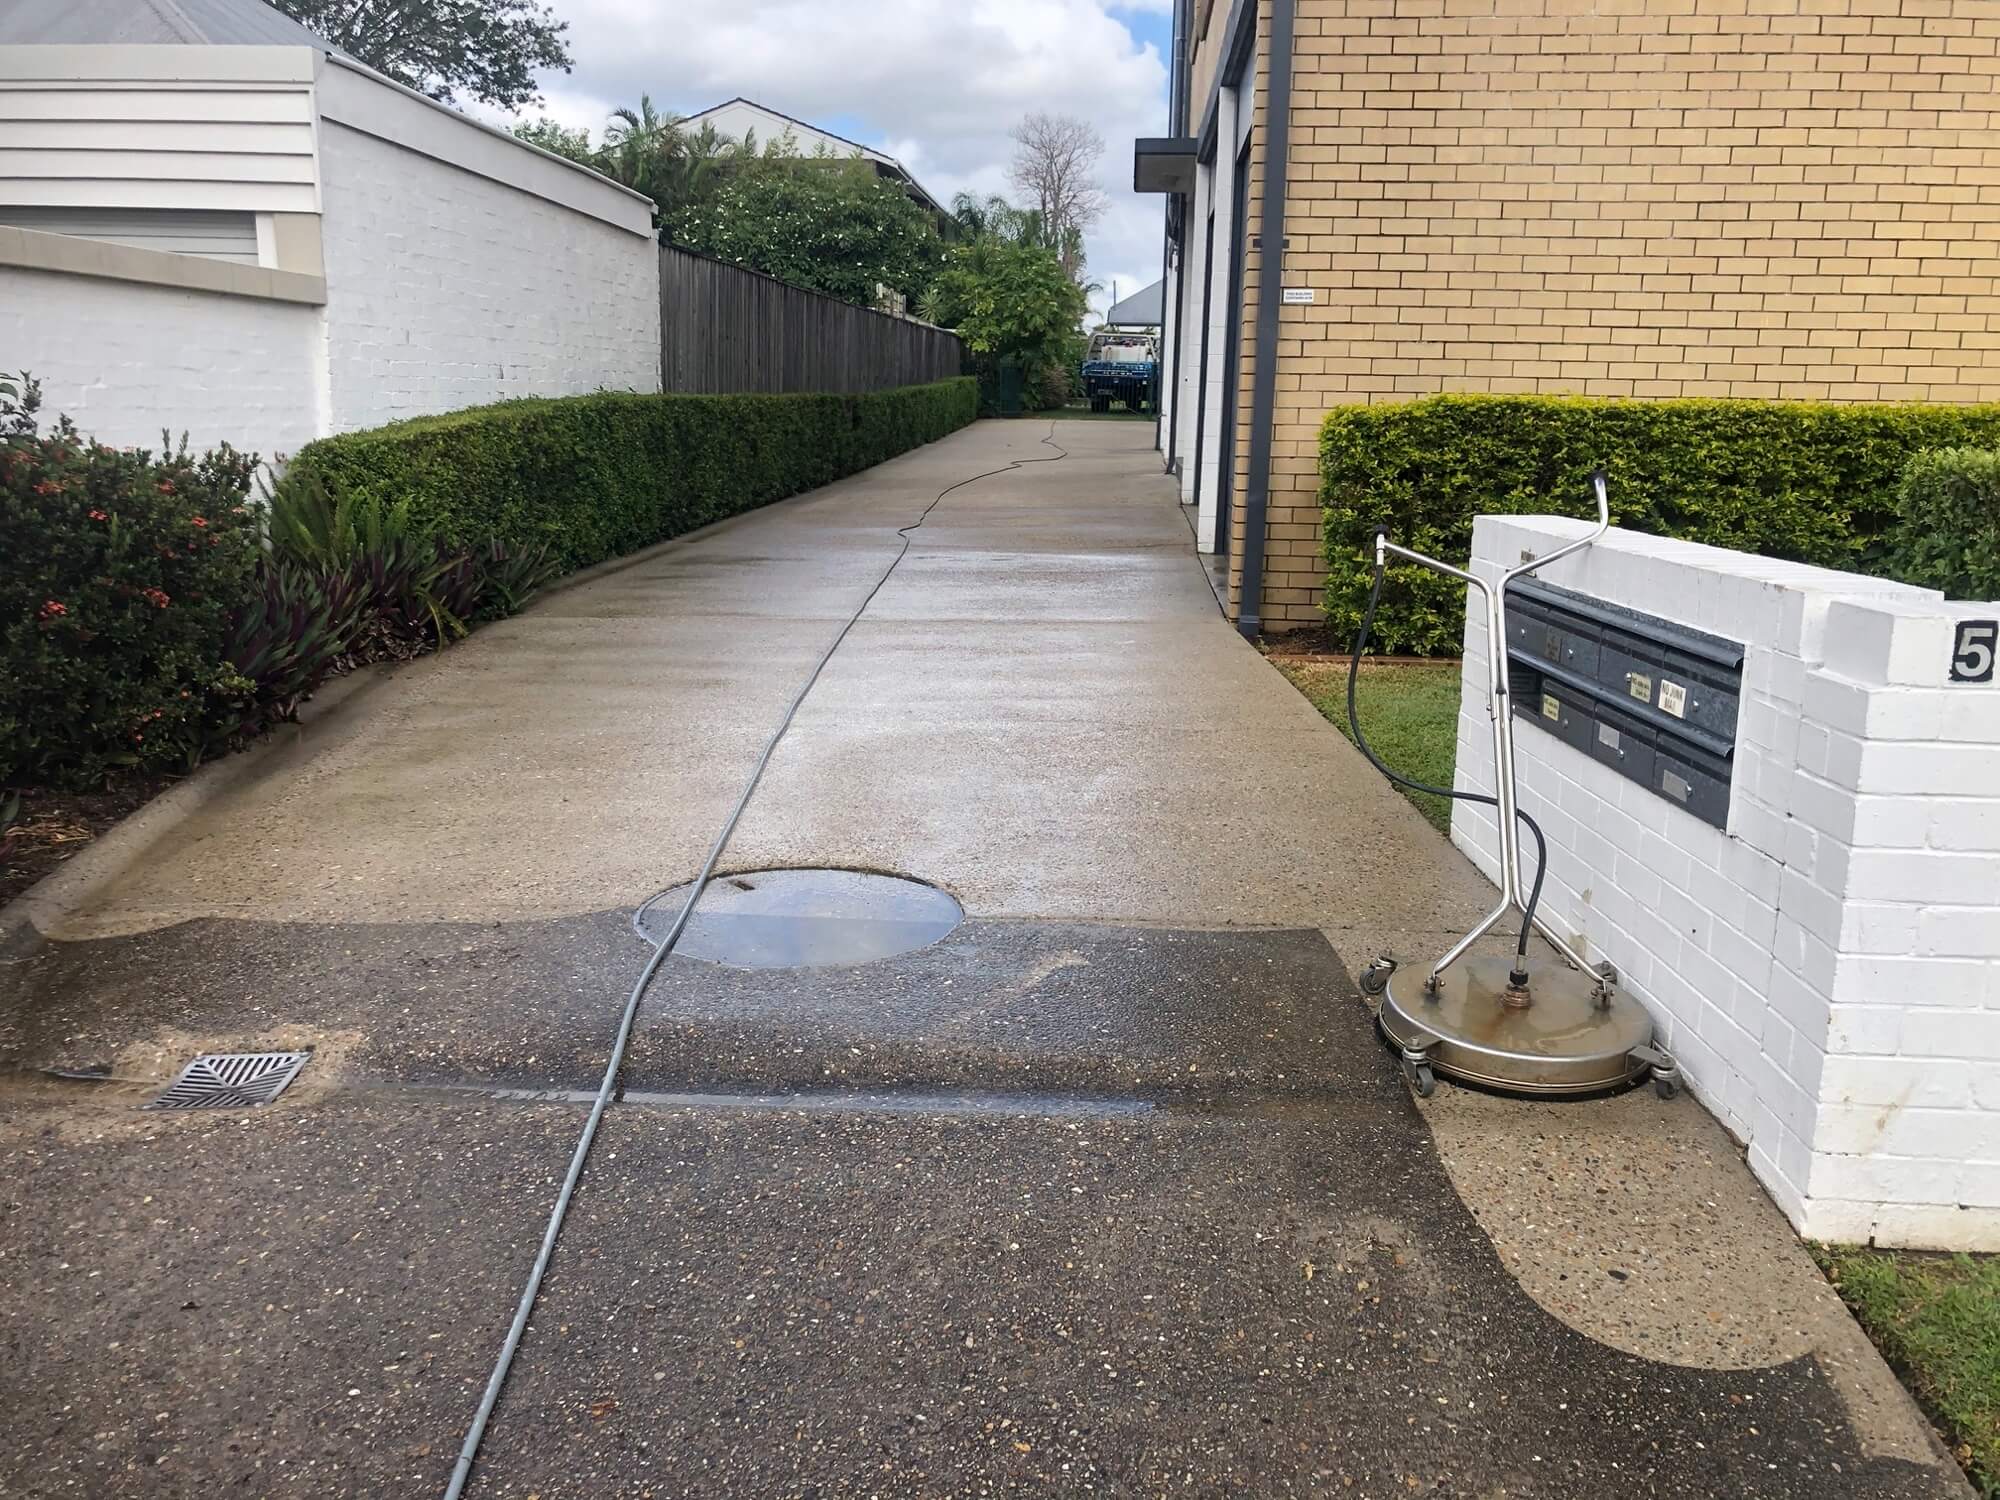 Driveway in Brisbane being cleaned by a machine